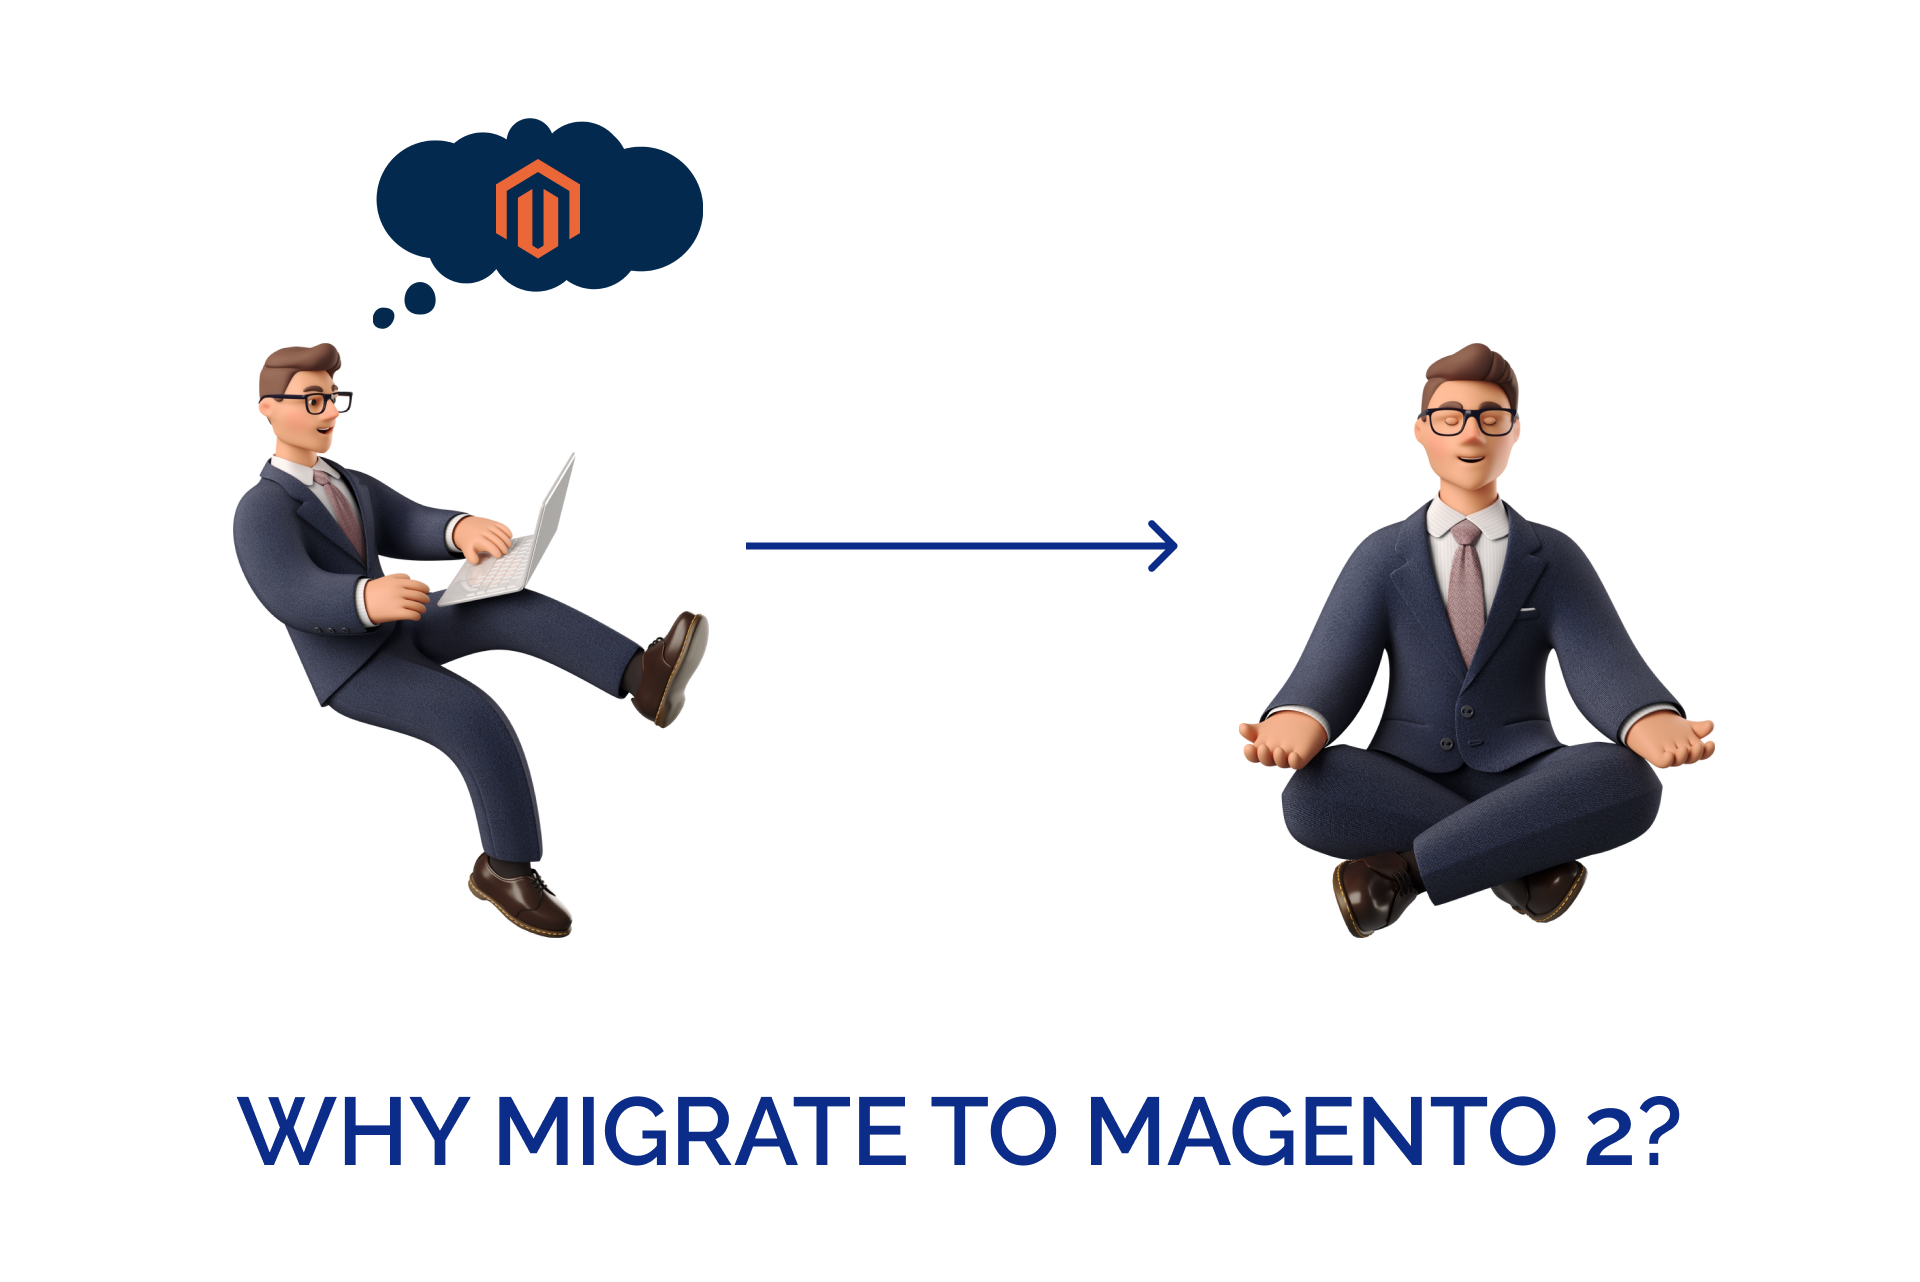 Why migrate to Magento 2?